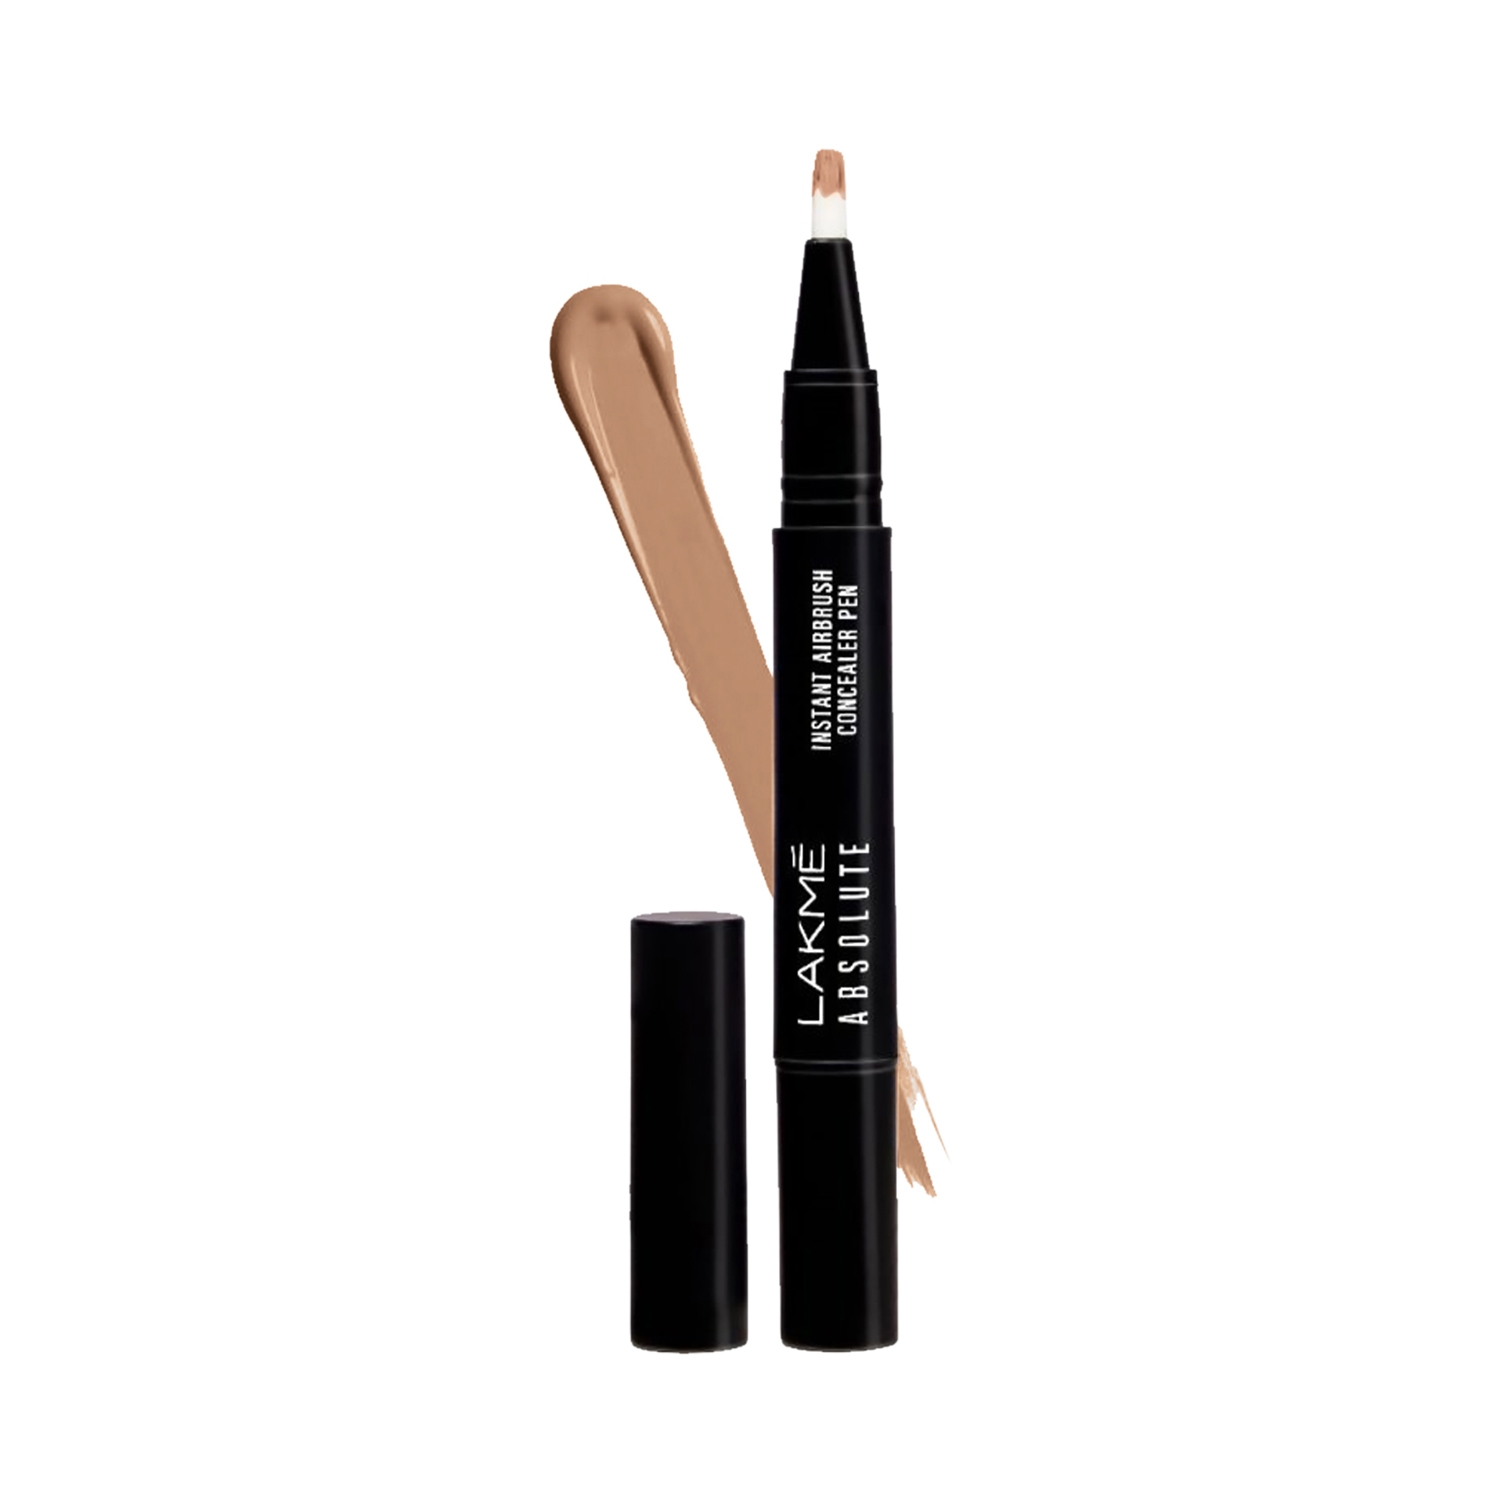 Lakme Absolute Instant Airbrush Concealer Pen - Sand (1.8g)